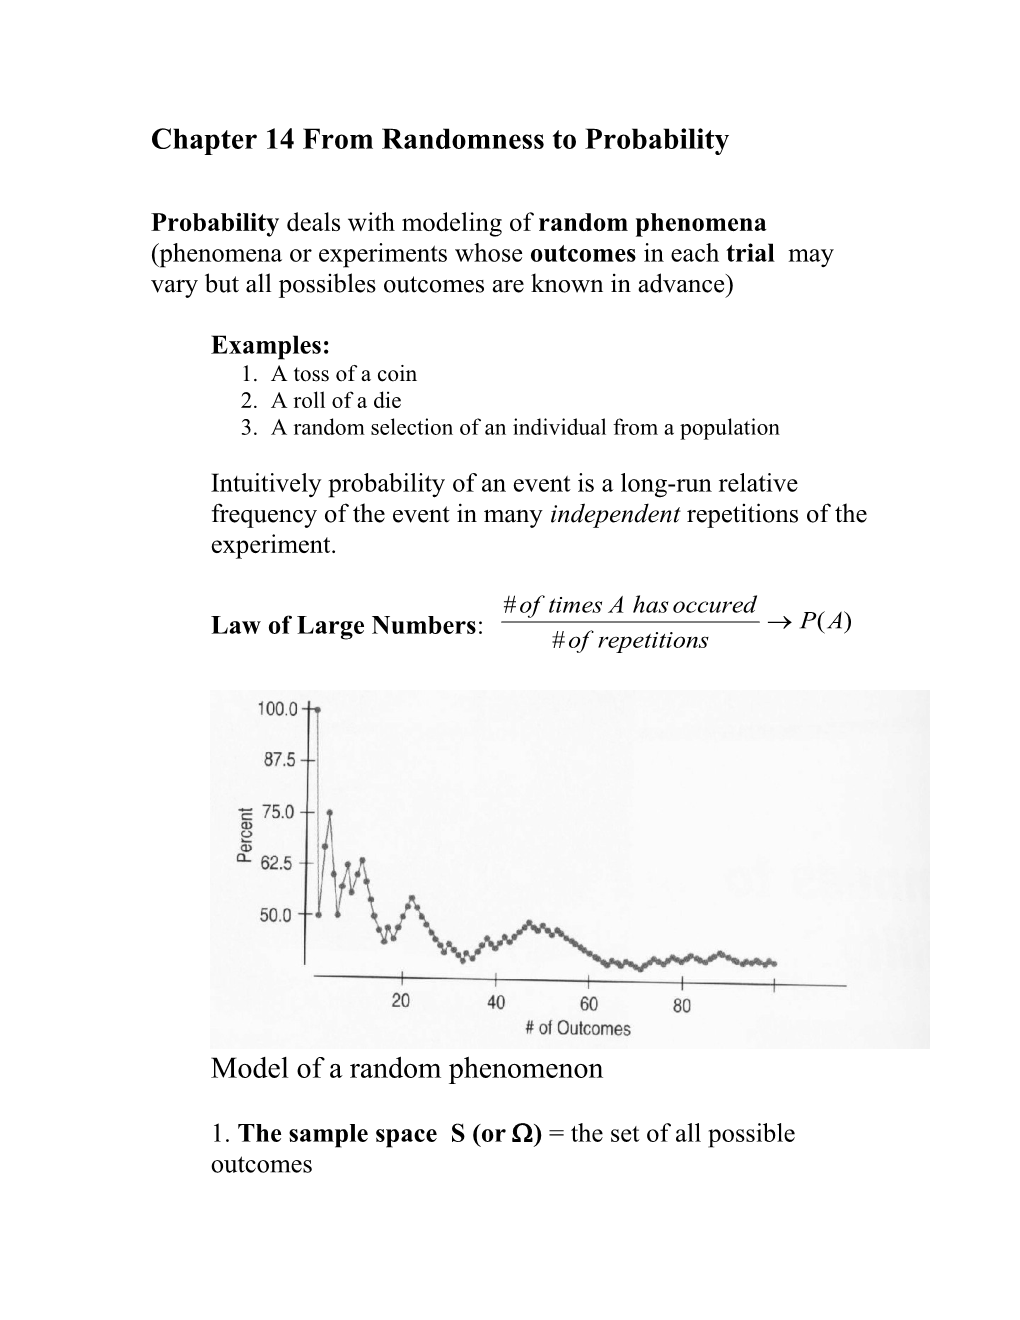 Chapter 14 from Randomness to Probability